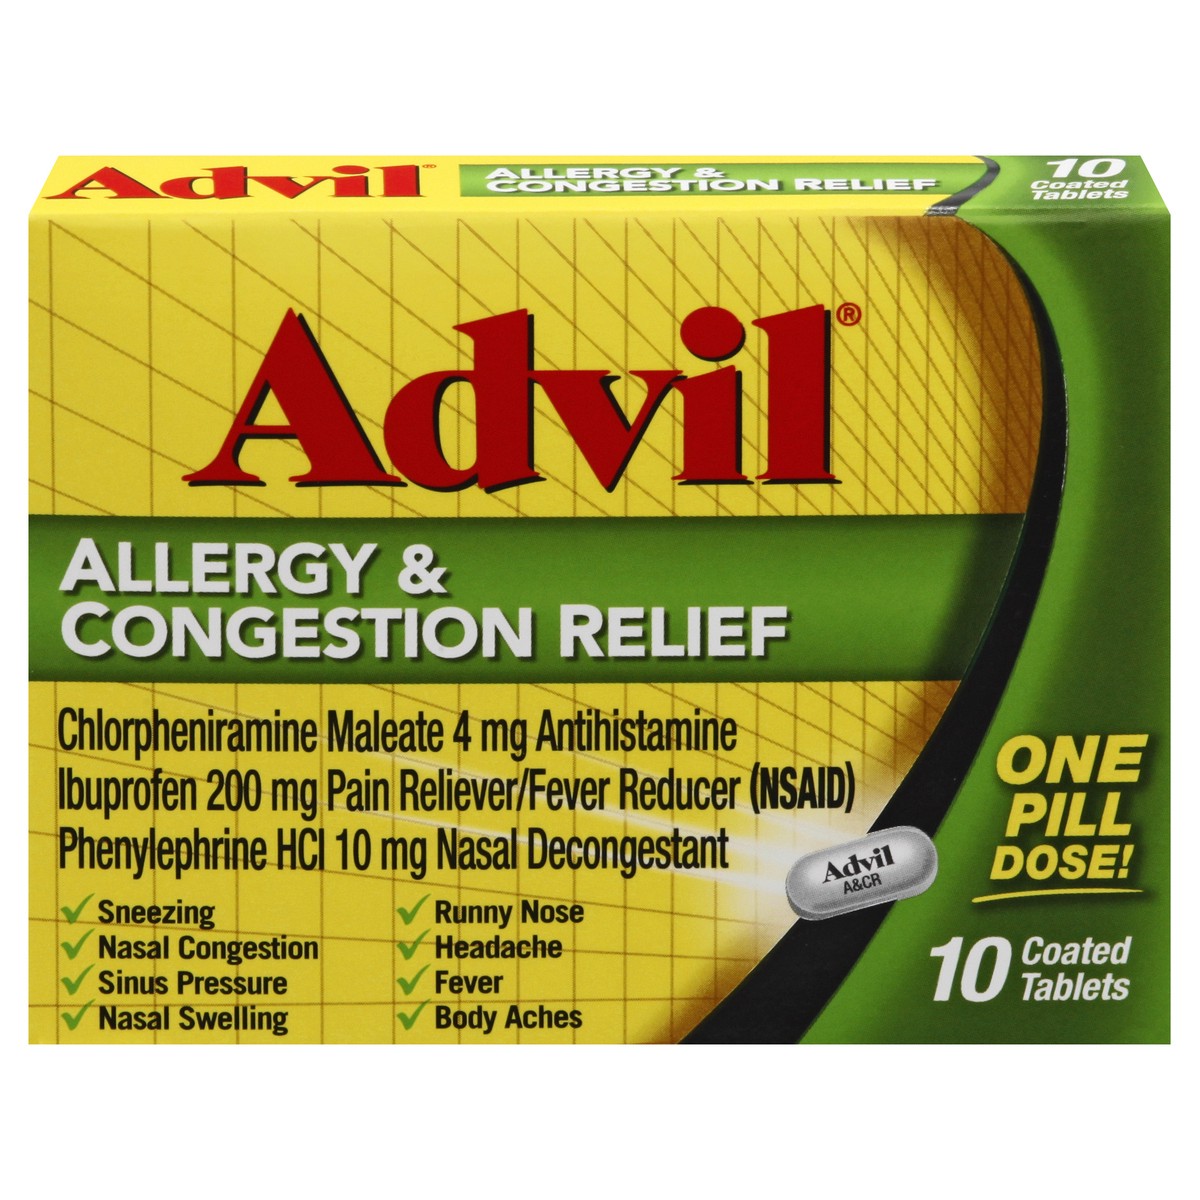 slide 1 of 10, Advil Allergy & Congestion Relief, Coated Tablets, 10 ct